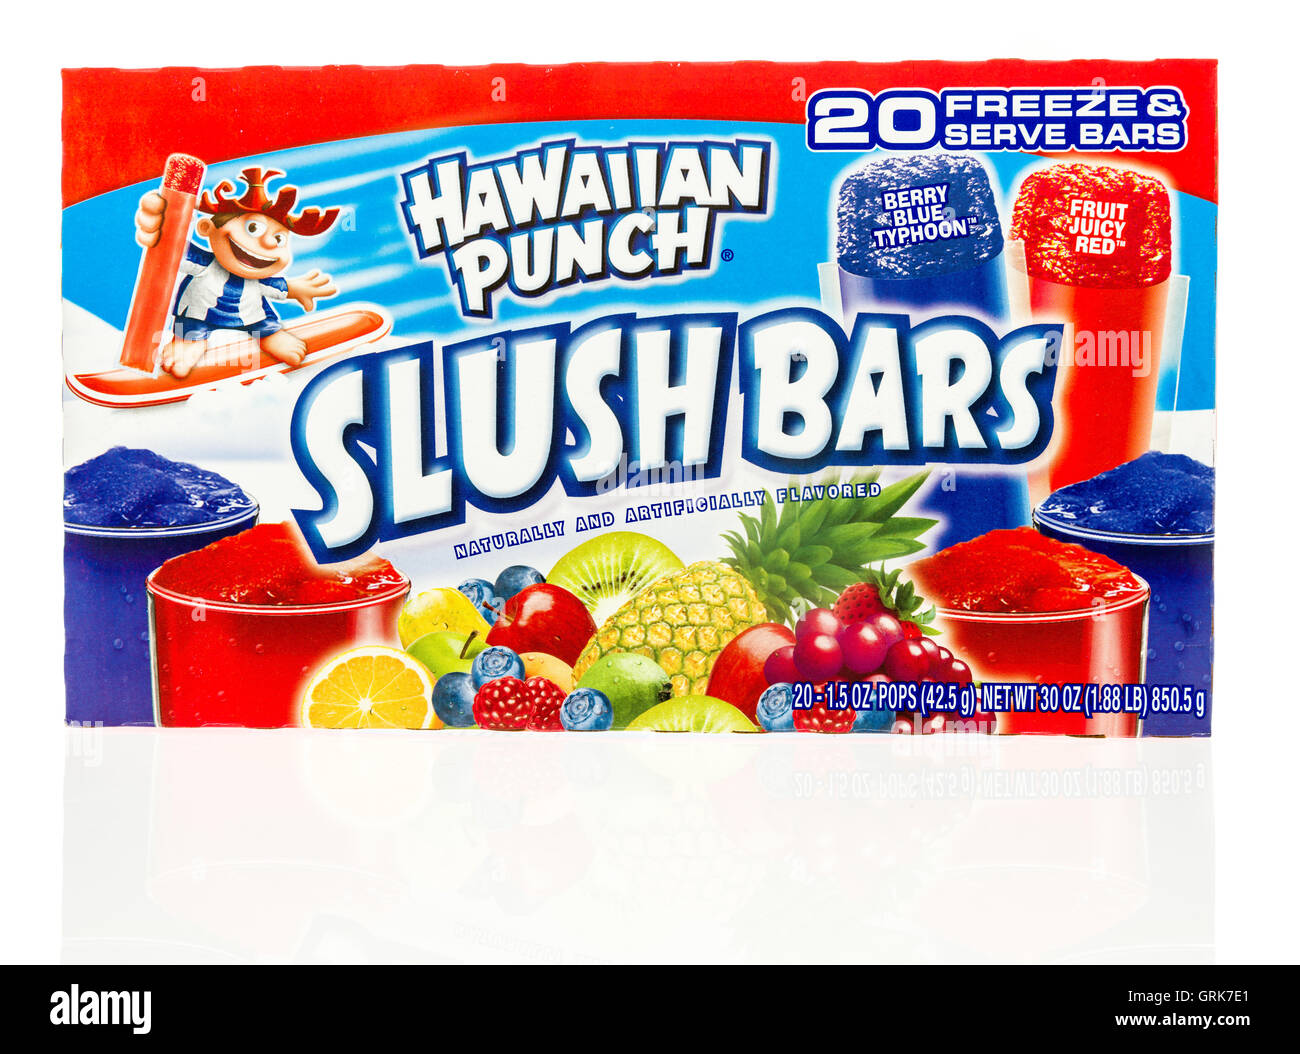 Winneconne, WI - 1 August 2016: Package of Hawaiian punch slush bars on an isolated background. Stock Photo